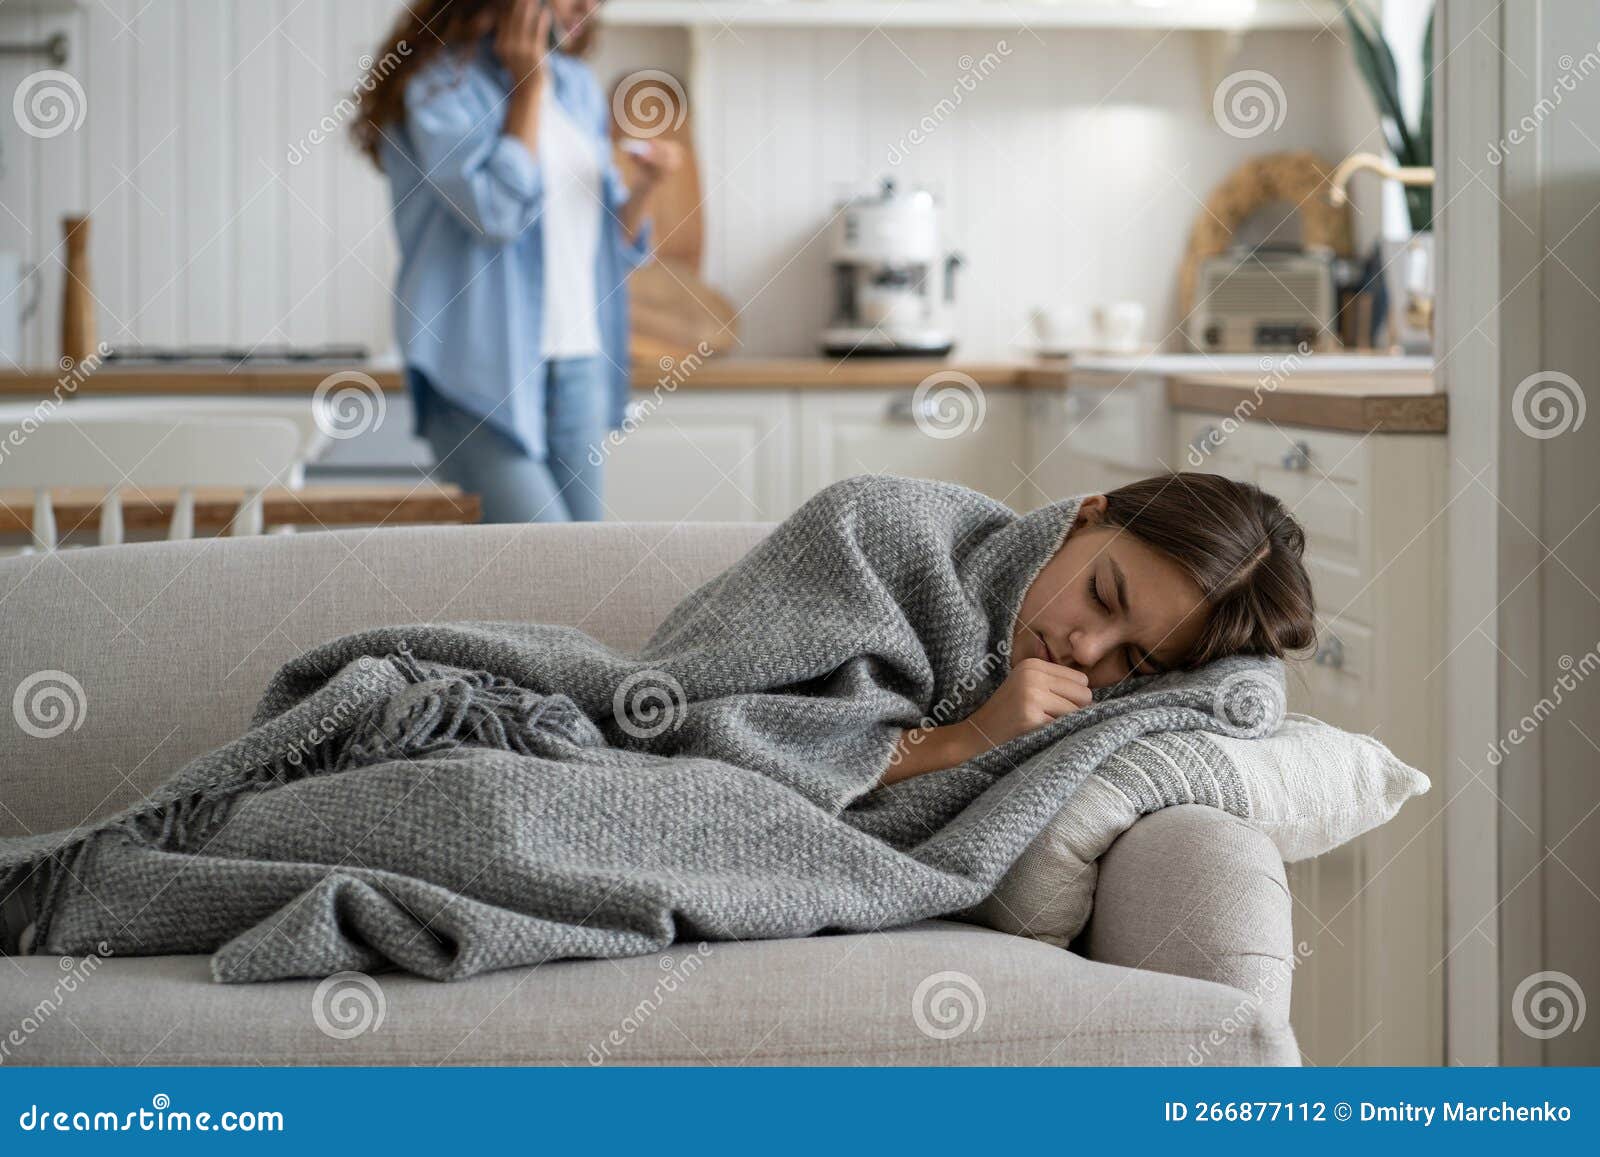 sick repressed teen girl sleeping in house on couch wrapped in blanket warming up in cold weather